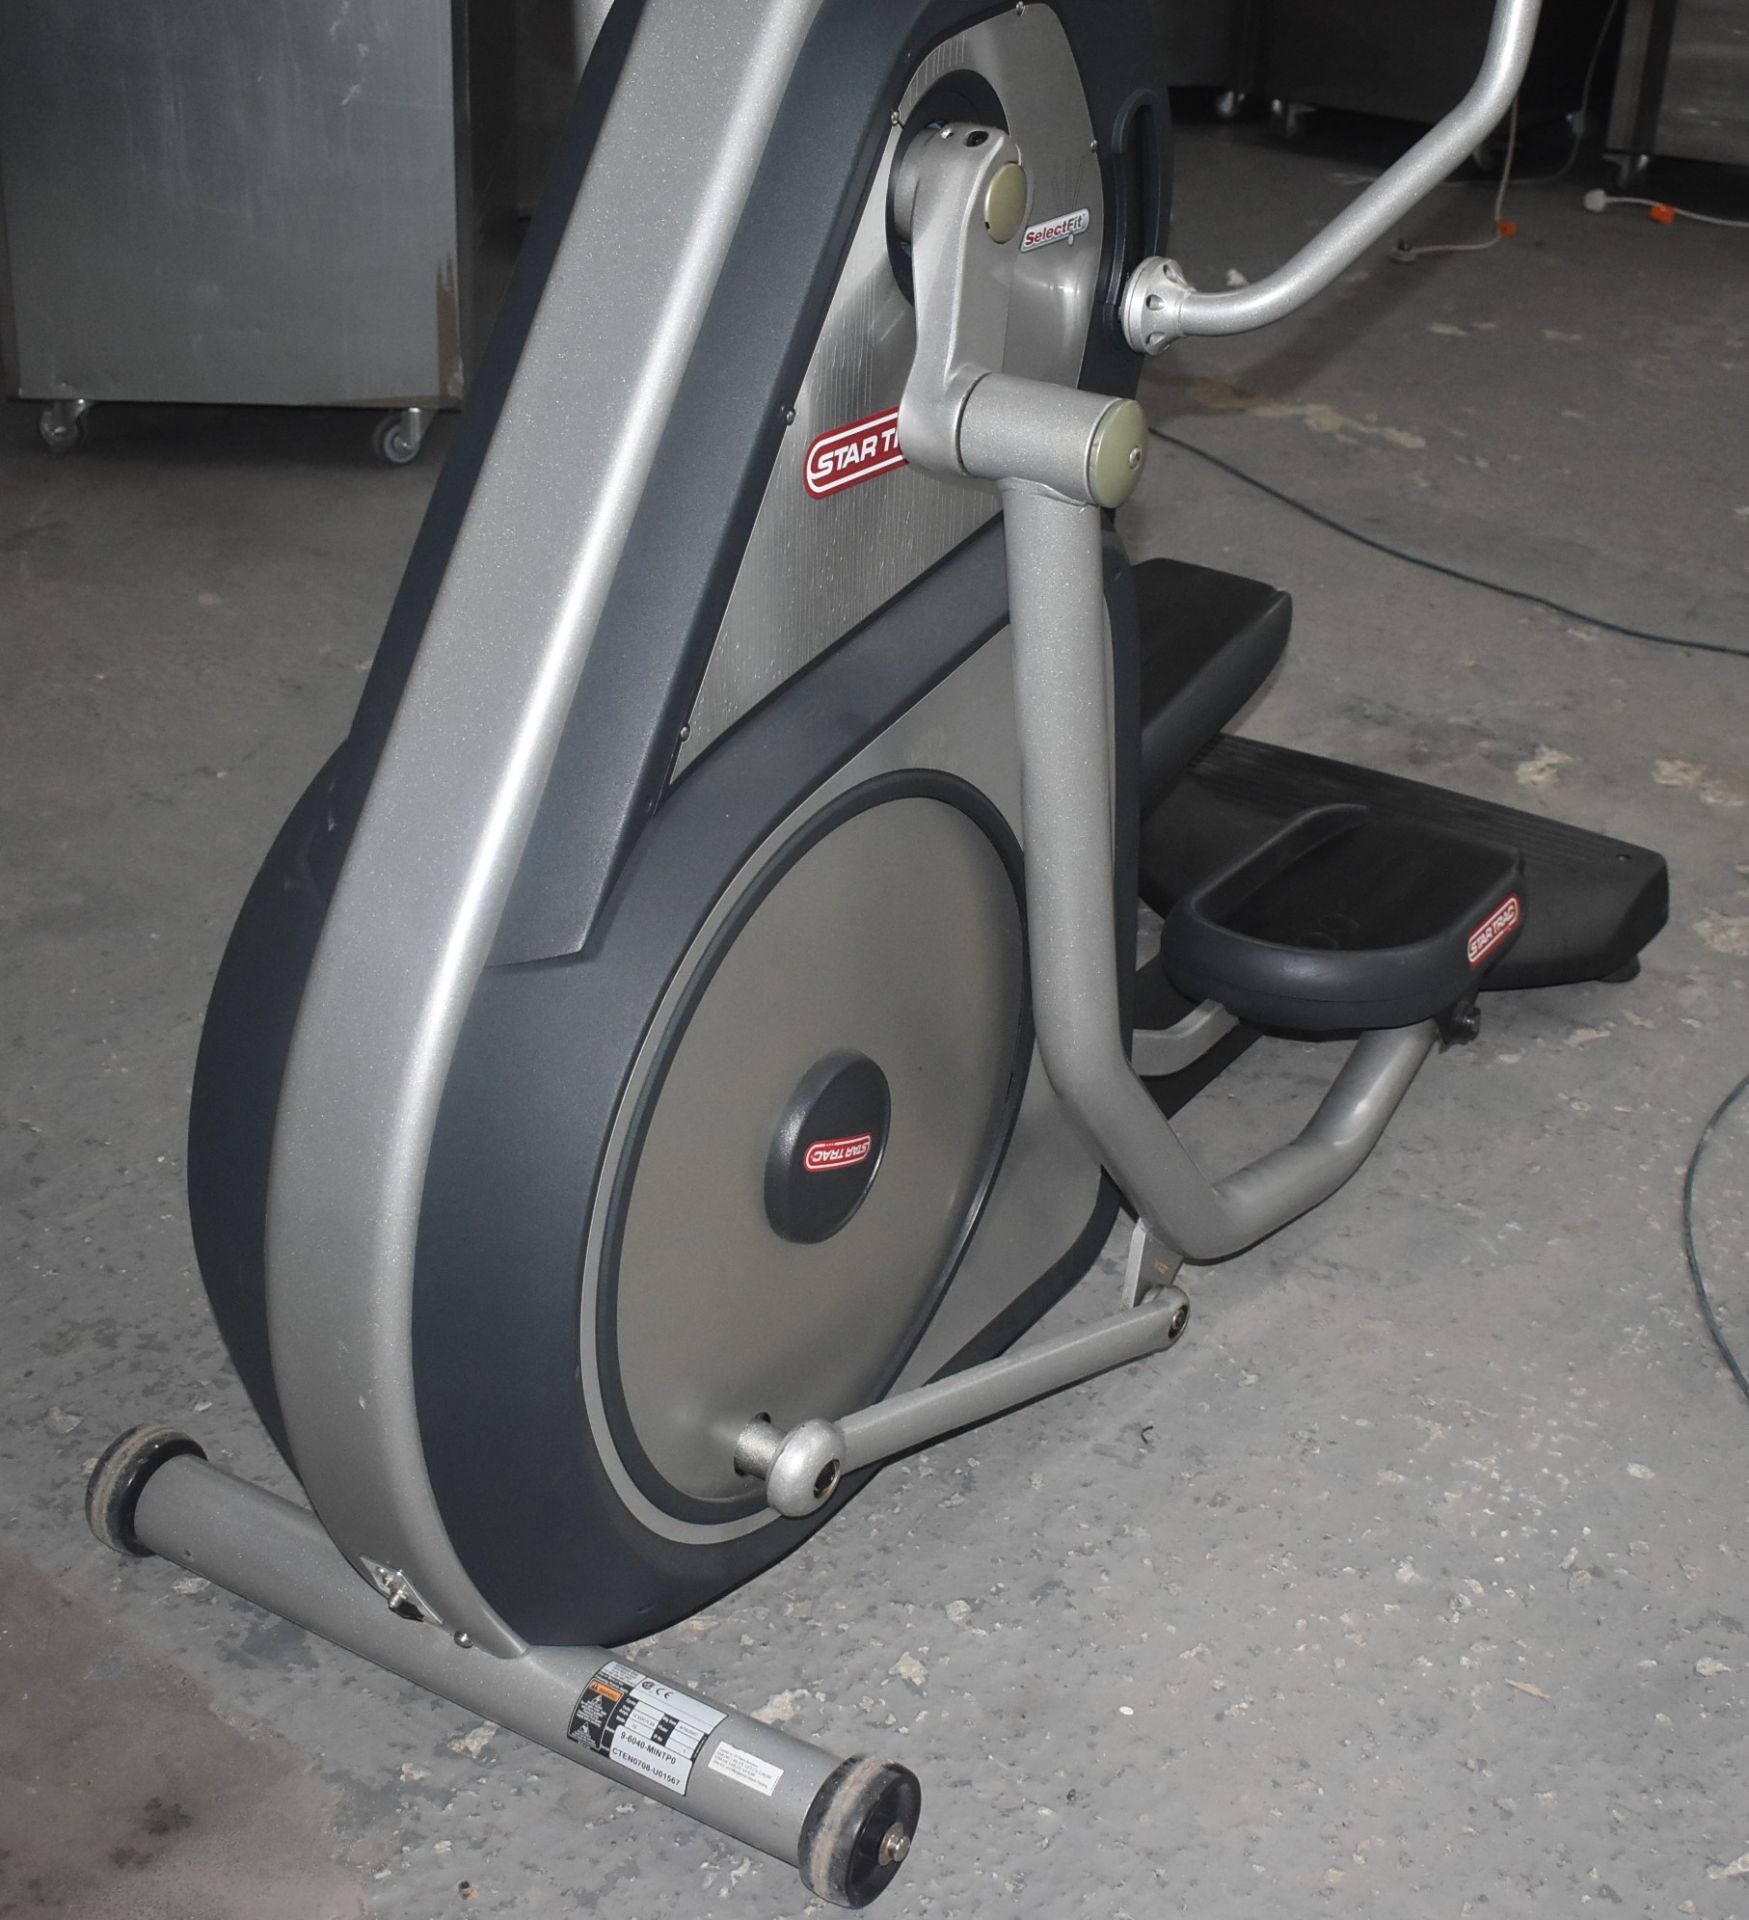 1 x Star Trac Commercial Excercise Elliptical Cross Trainer - CL011 - Ref SL307 GIT -  Location: - Image 5 of 9